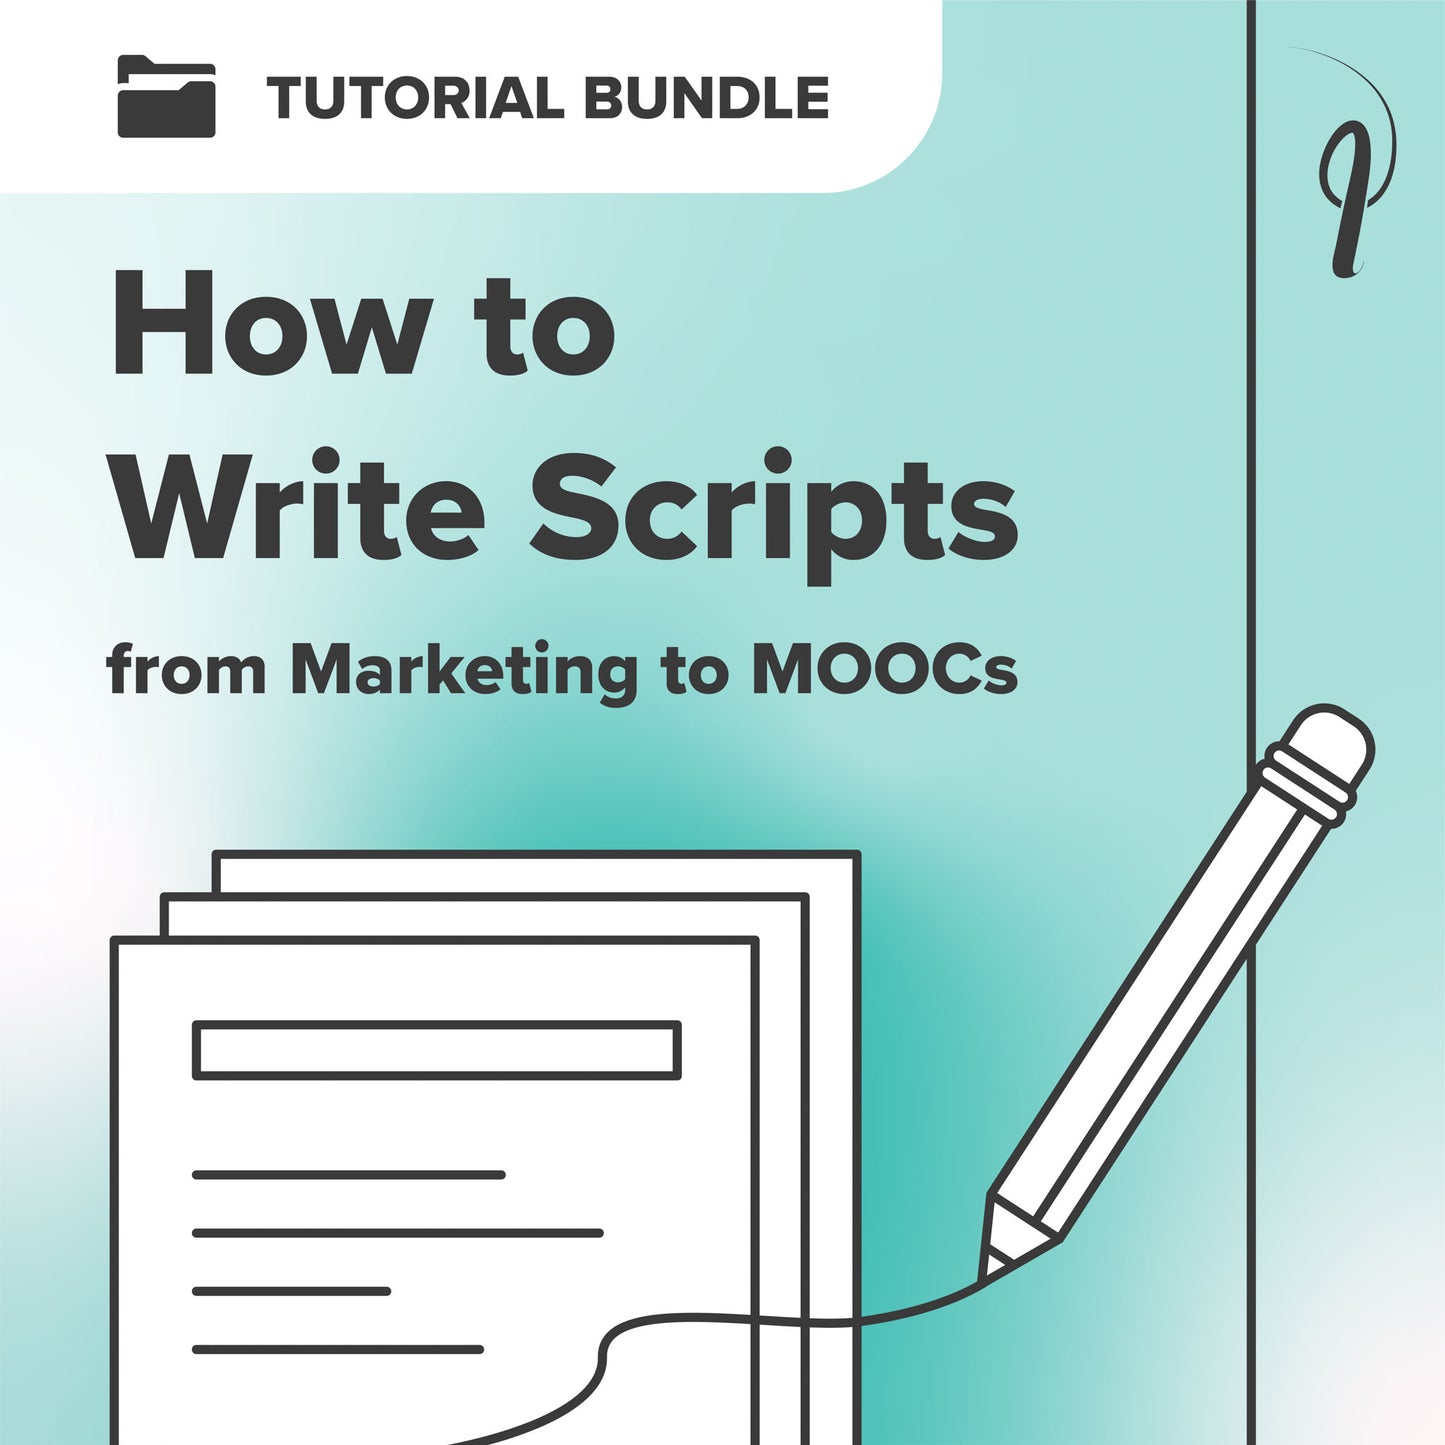 How to Write Scripts from Marketing to MOOCs - Tutorial Bundle